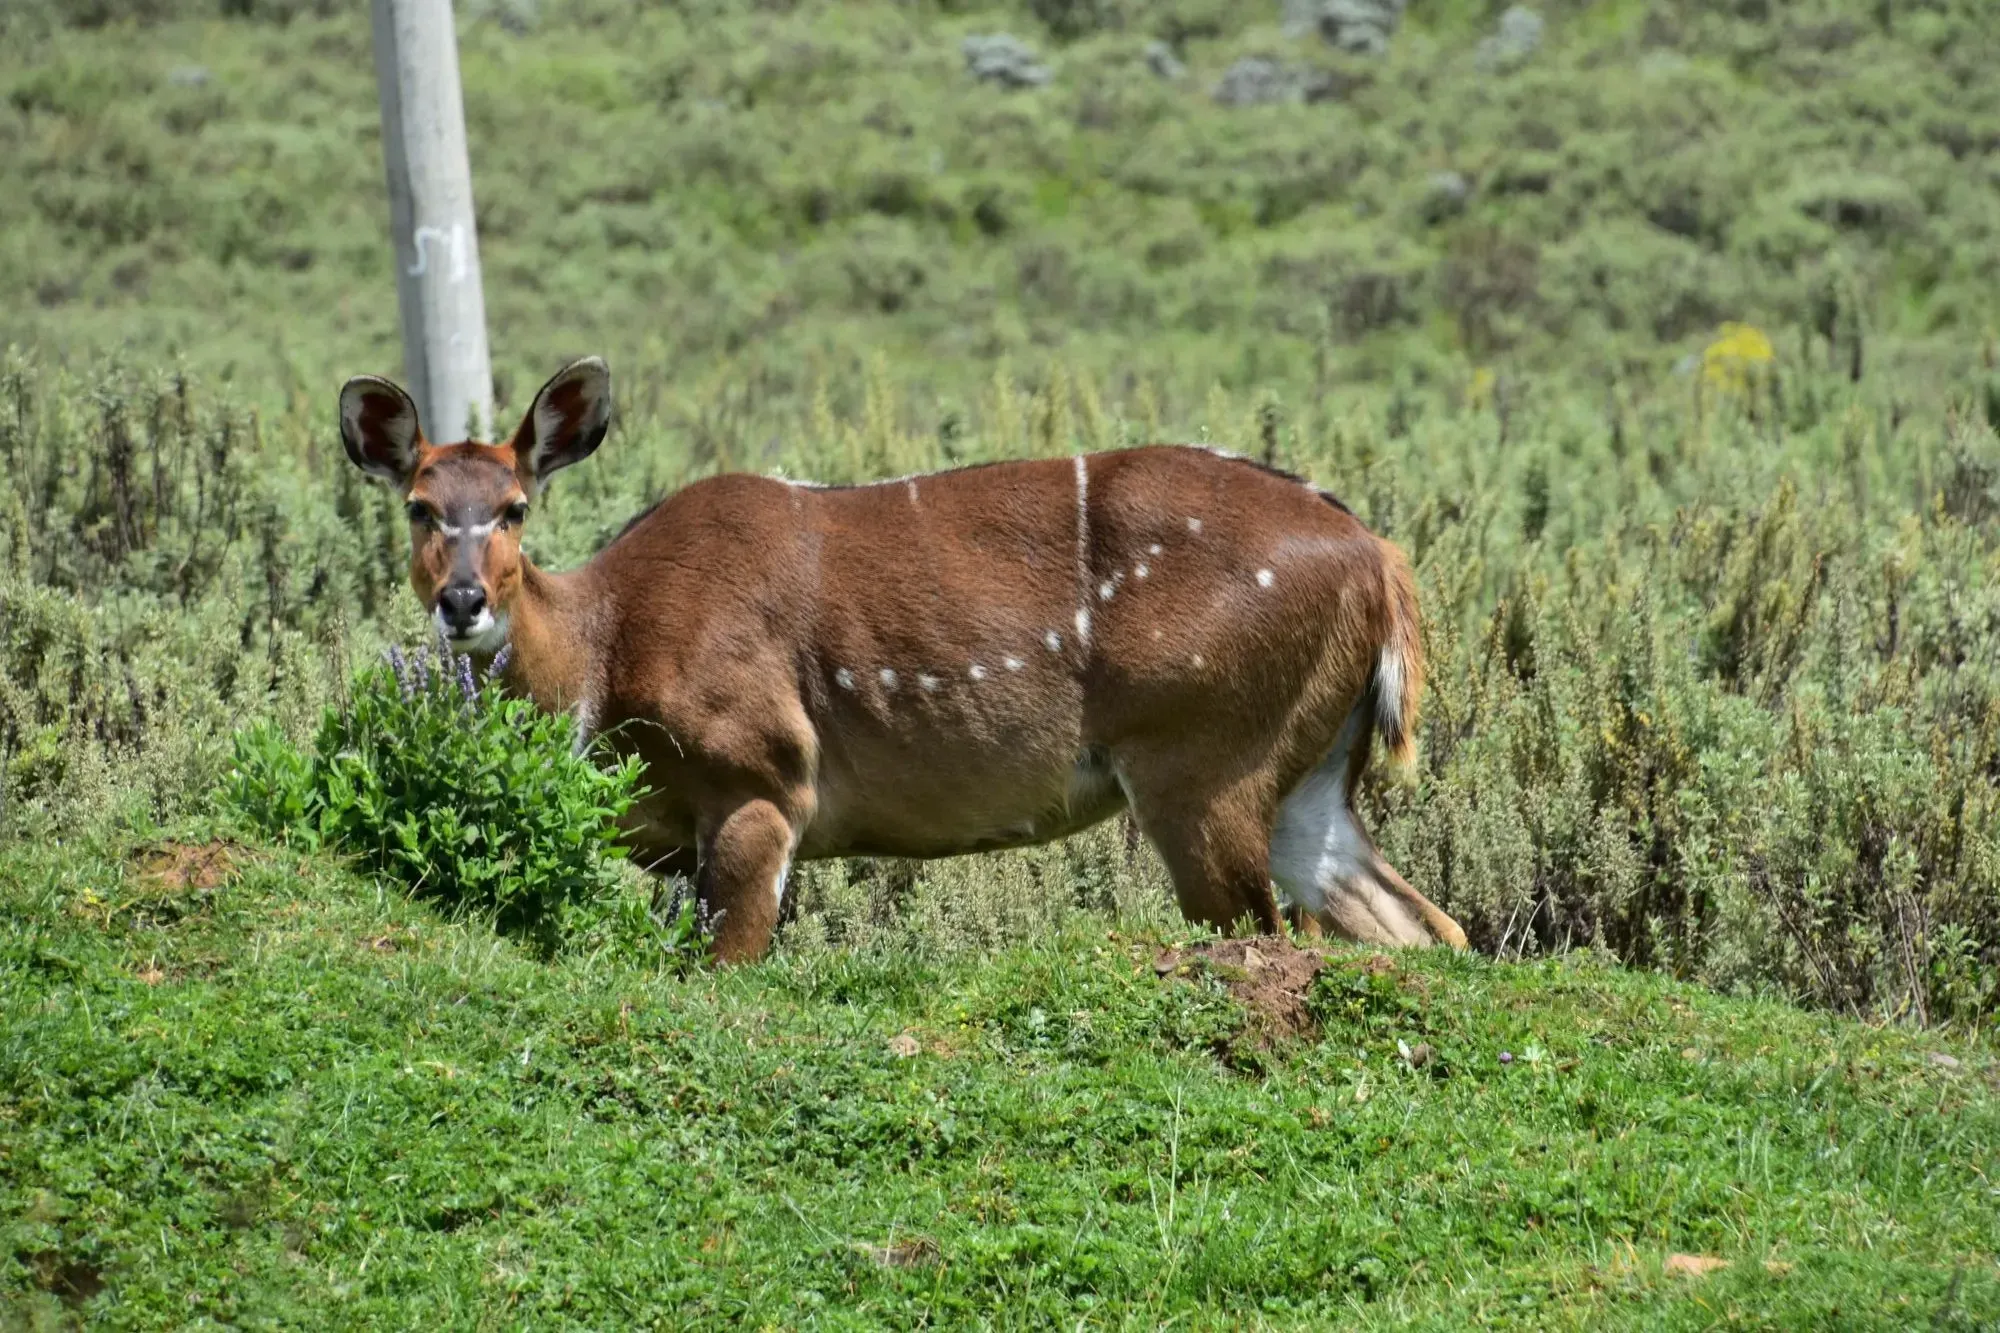 Mountain nyala populations are reduced due to hunting, human encroachment, and habitat loss.